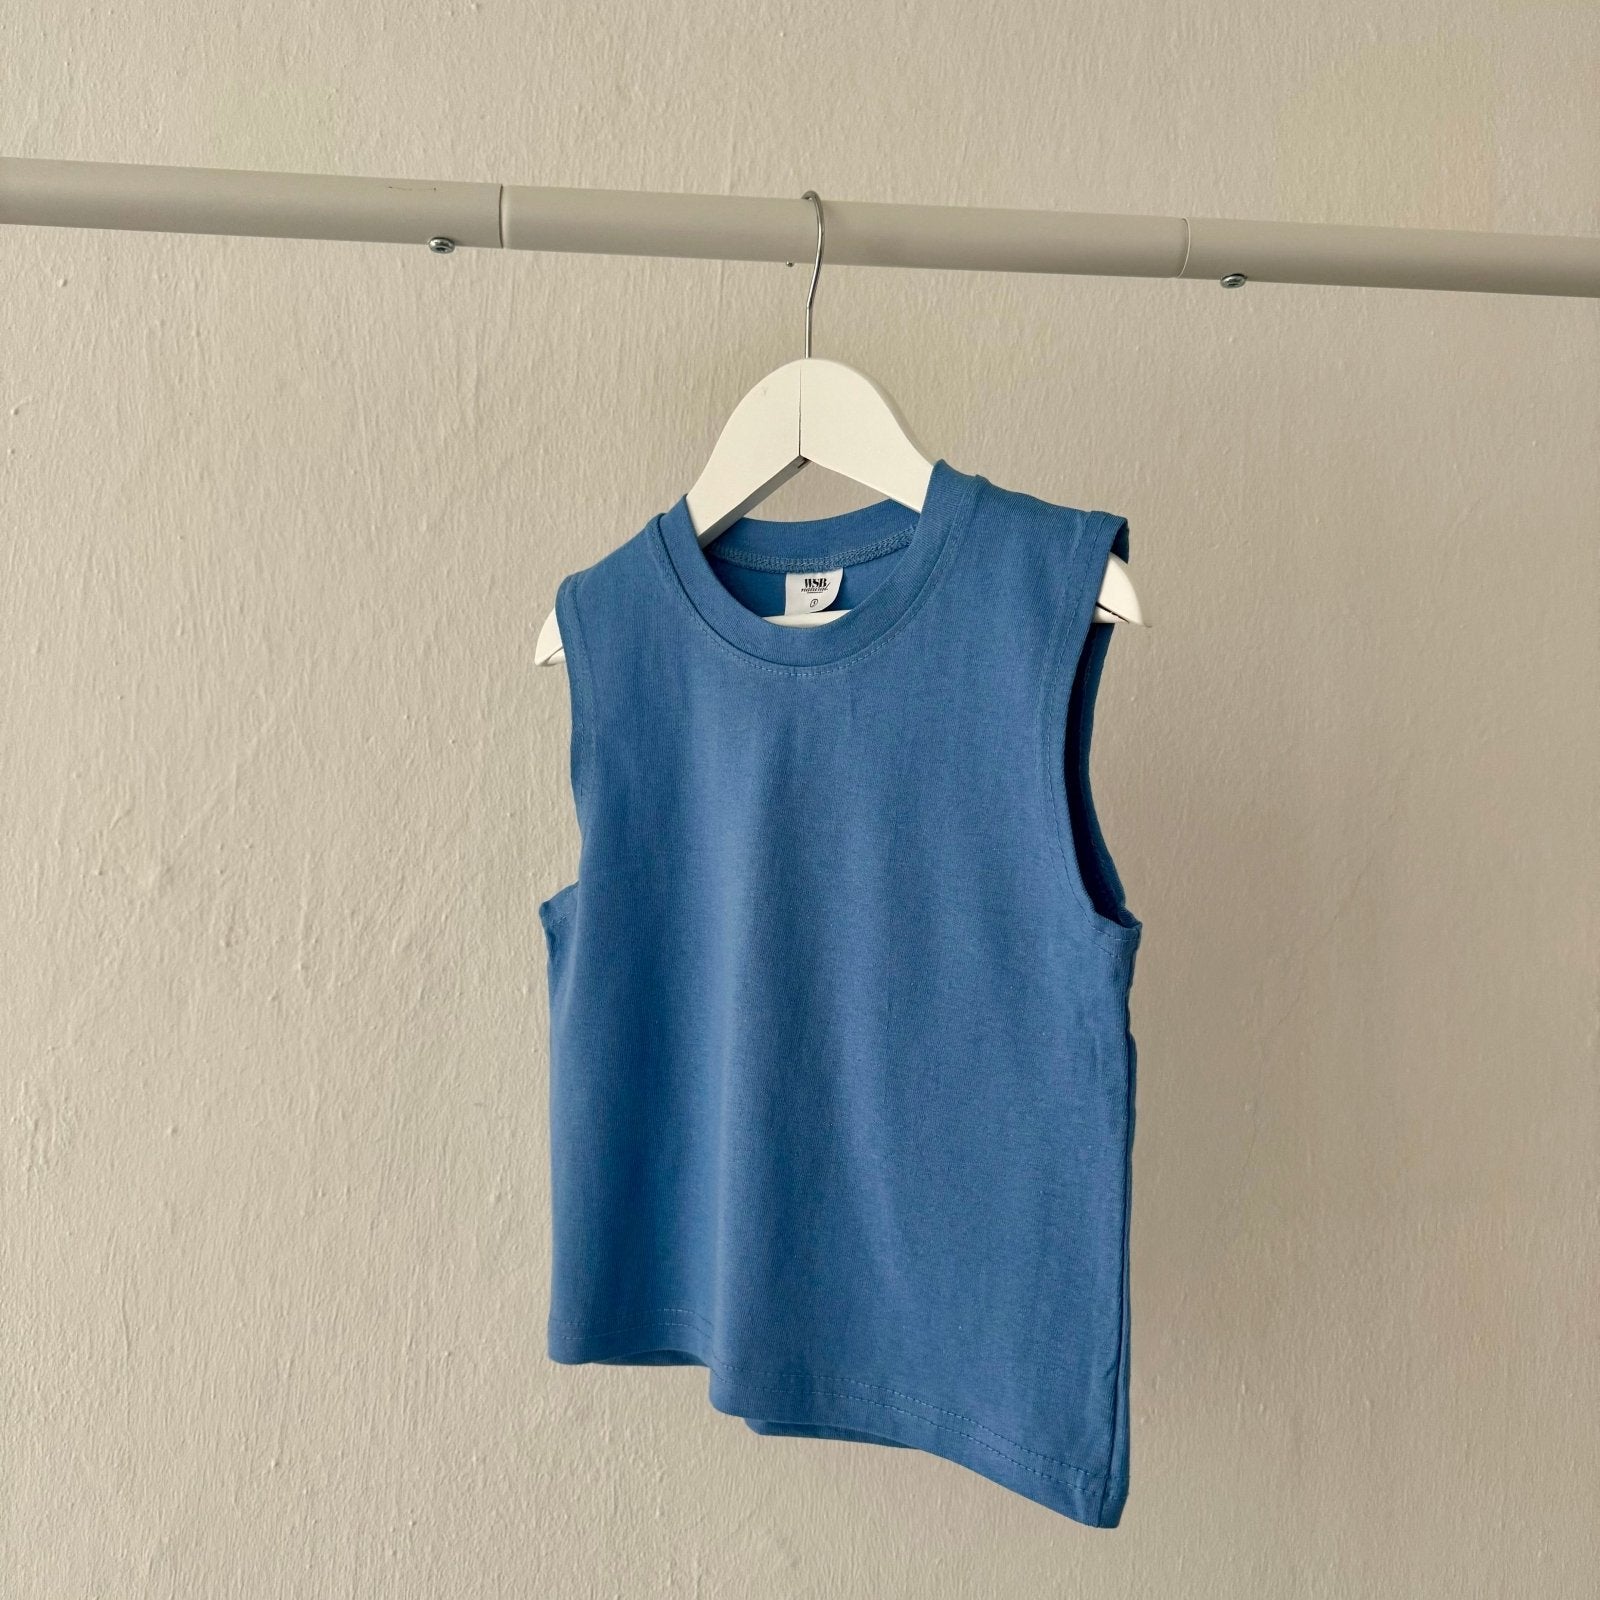 Over Sleeveless Tee find Stylish Fashion for Little People- at Little Foxx Concept Store